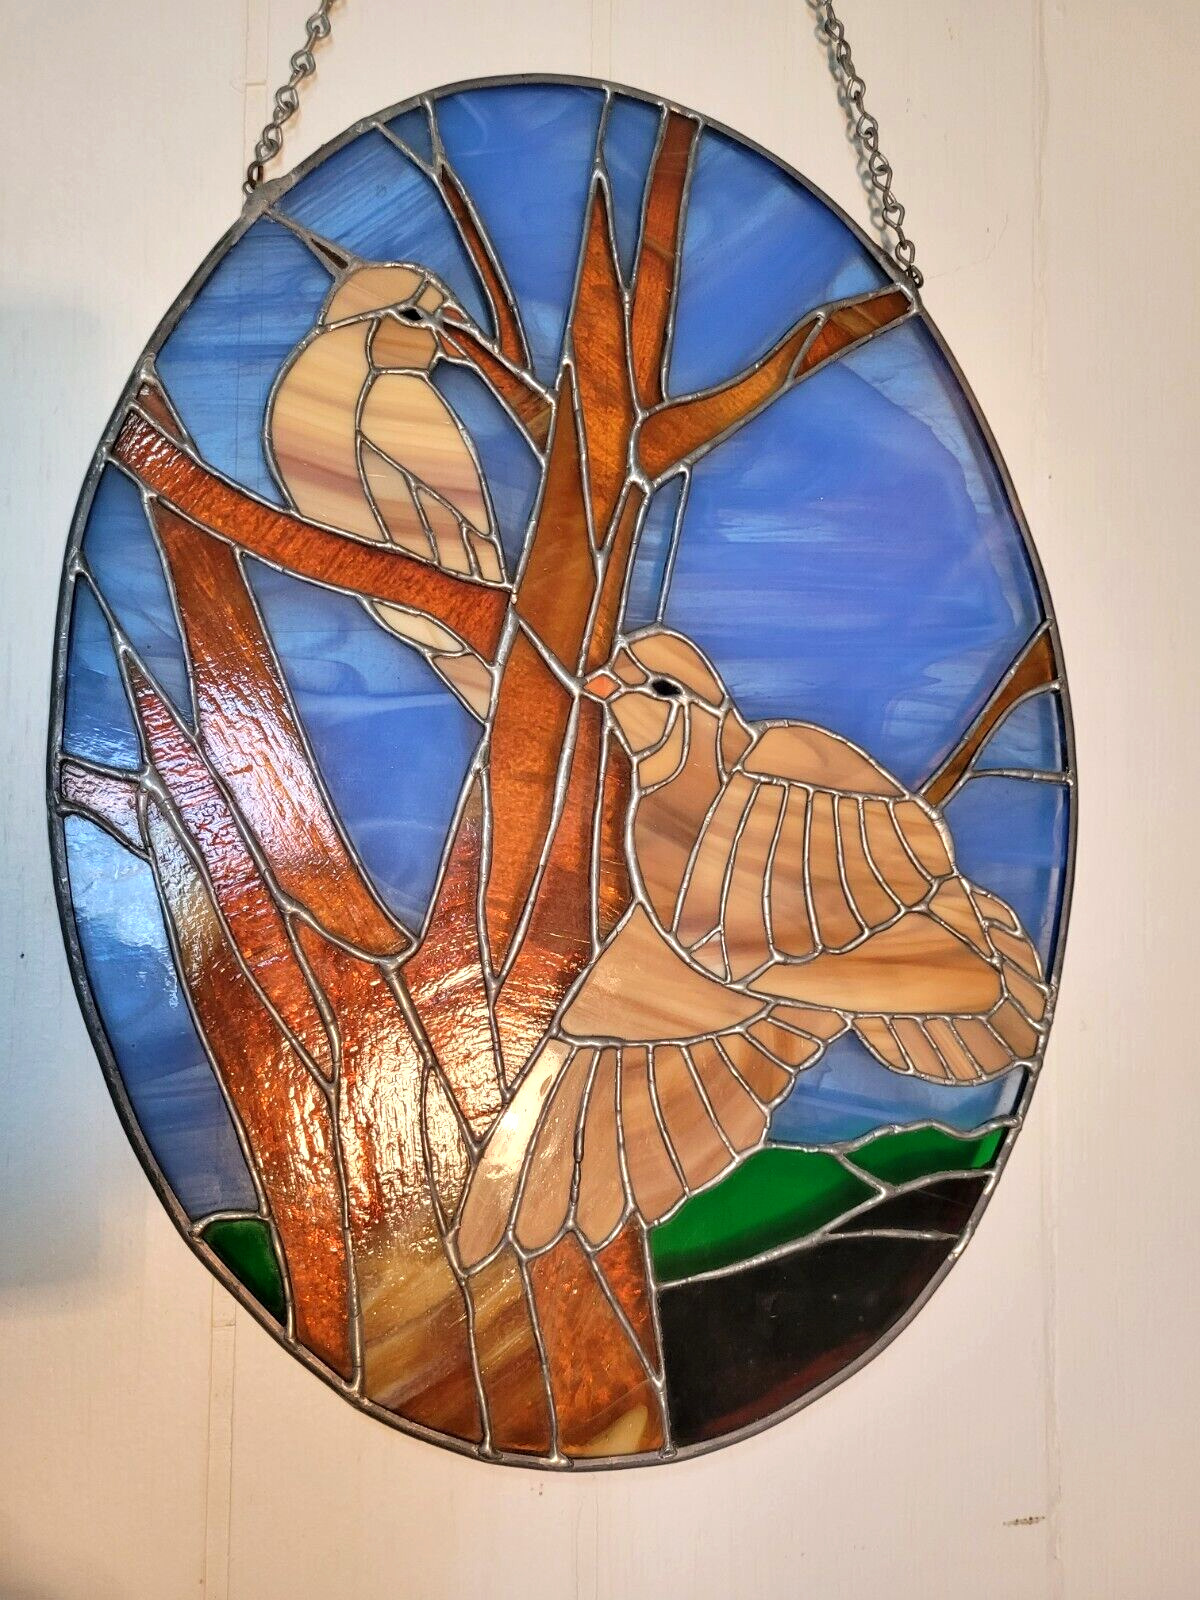 Beautiful Vtg. Stained Glass Window Hanging - Oval - 2 Birds Perched in a Tree